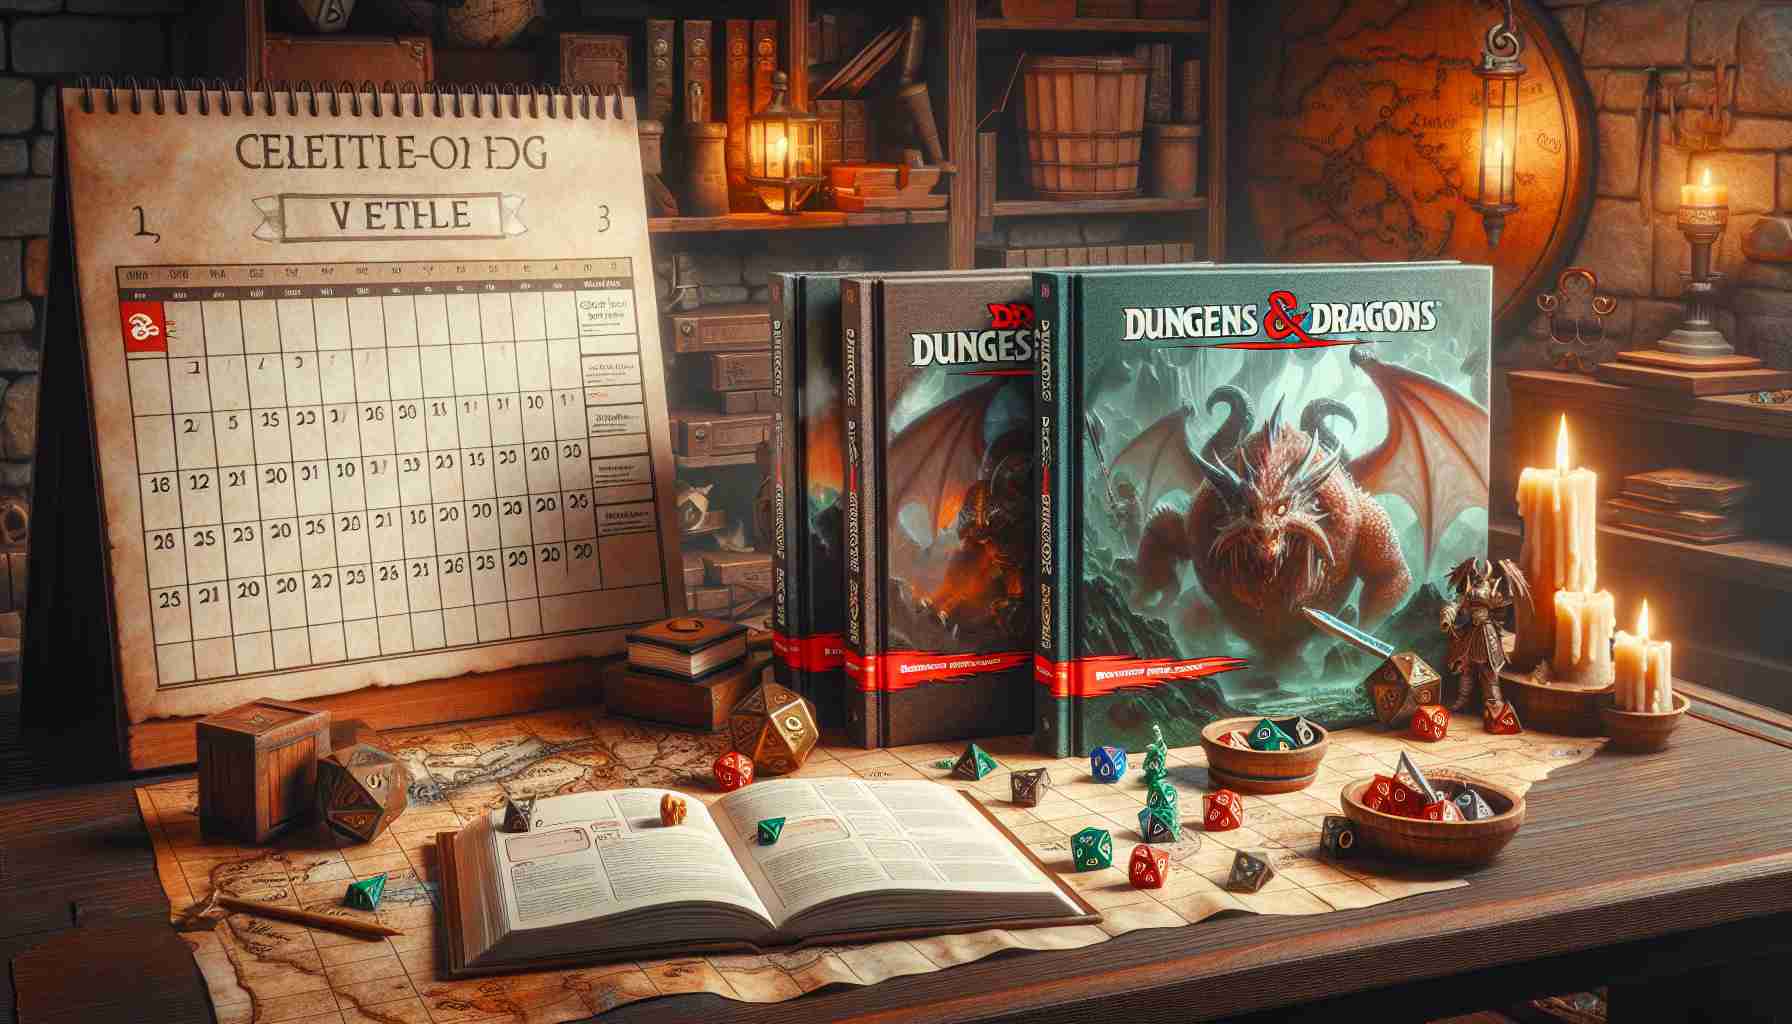 Release Dates for Dungeons and Dragons Core Rulebooks